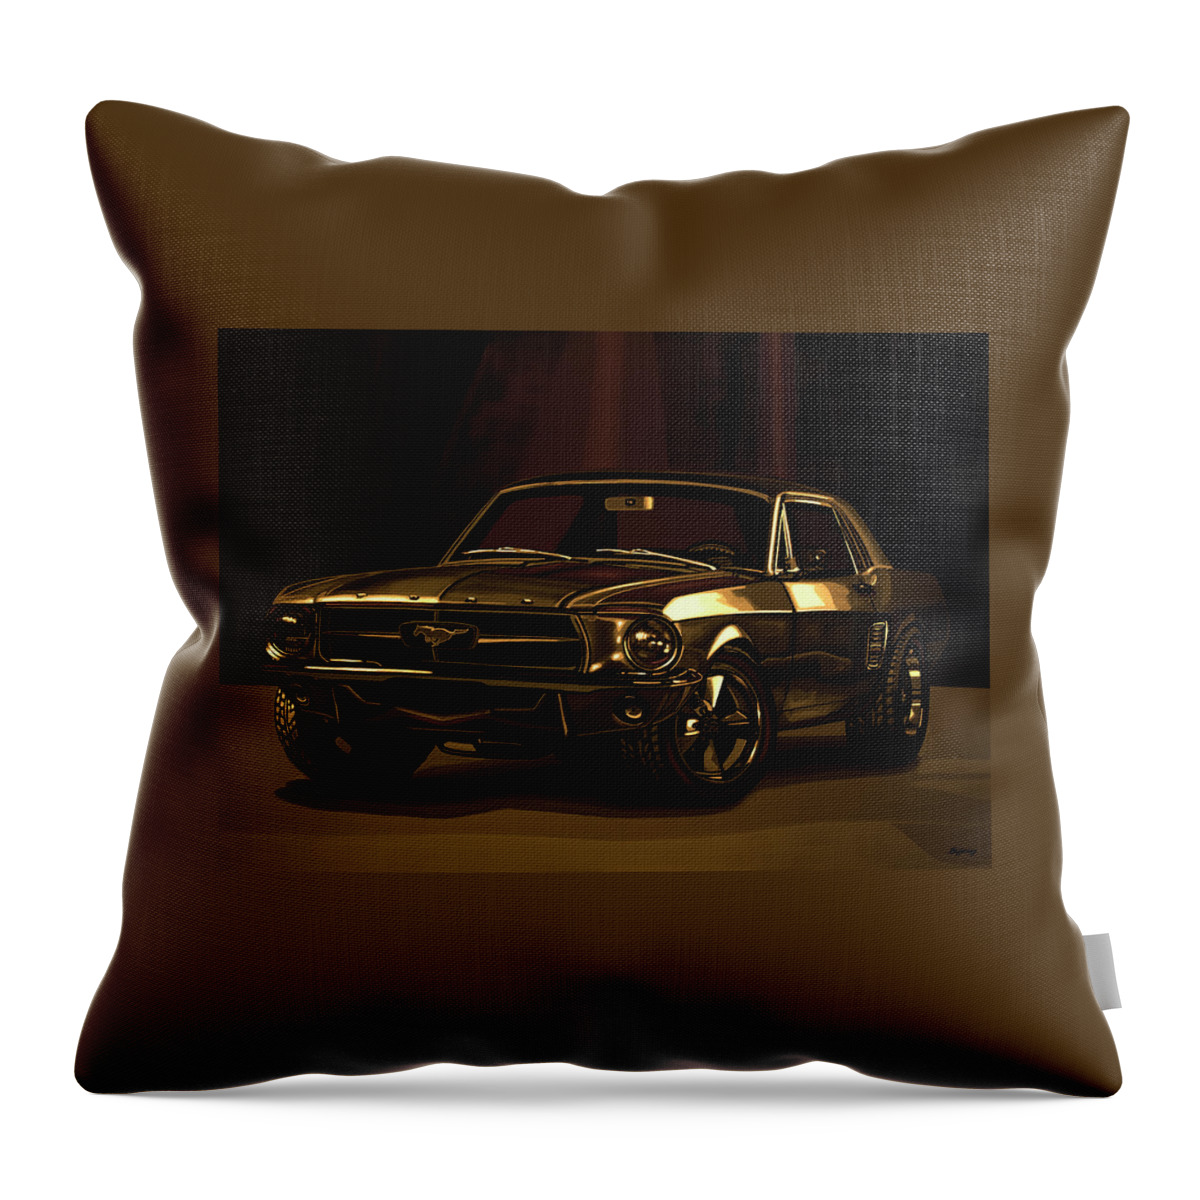 Ford Mustang Throw Pillow featuring the mixed media Ford Mustang 1967 Mixed Media by Paul Meijering